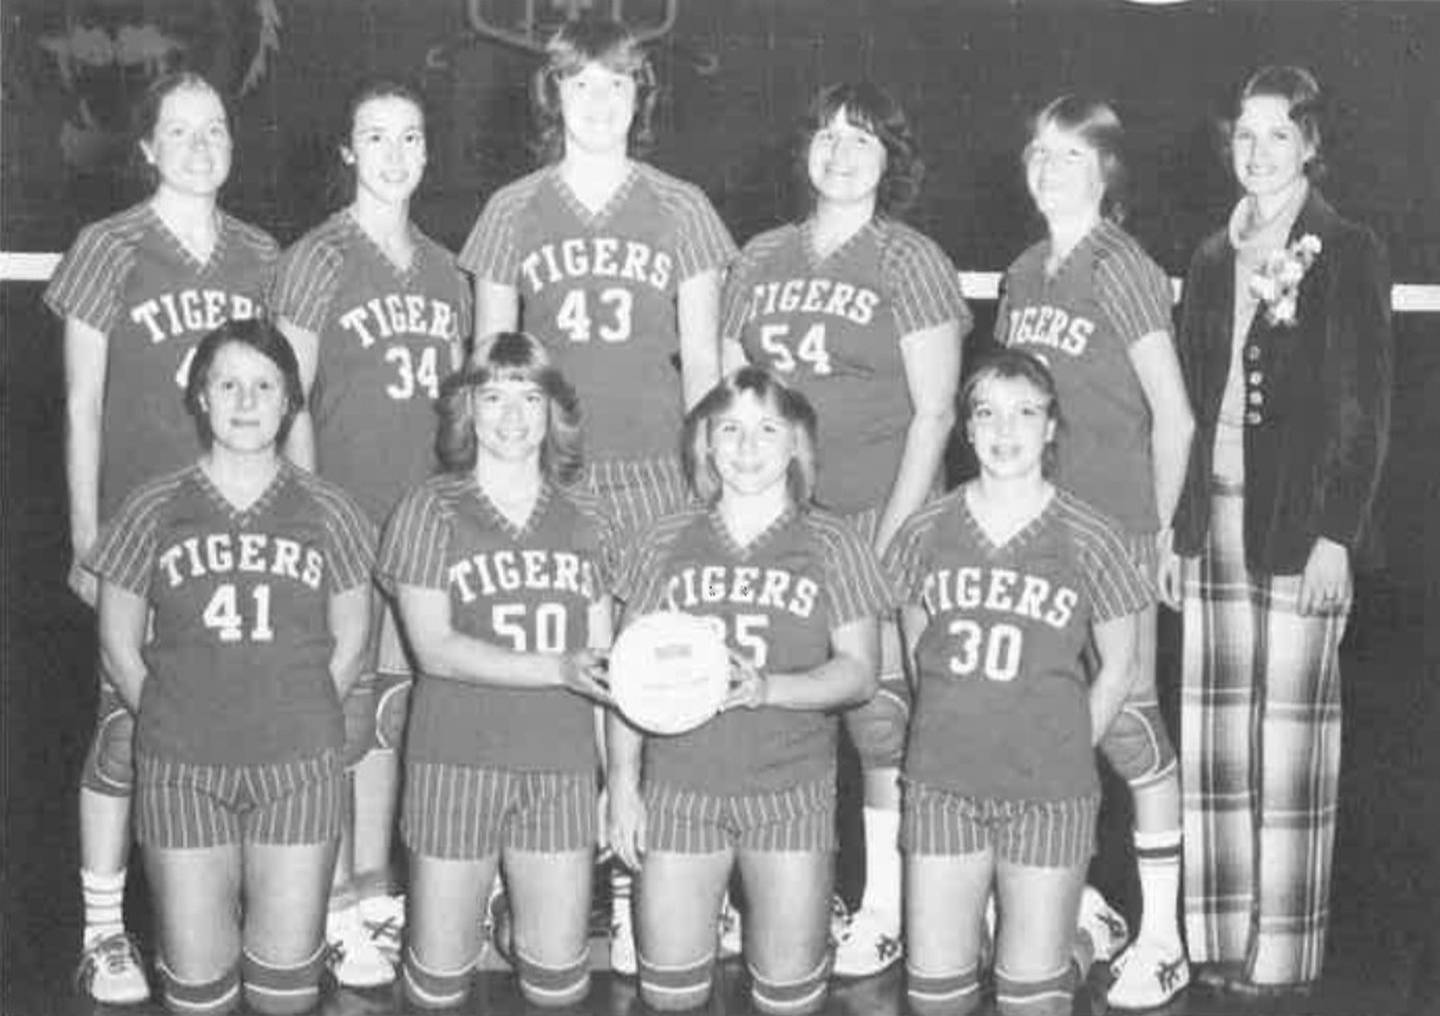 The 1980 PHS volleyball team was the first to reach the IHSA State Tournament. Team members were (front row, from left) Sharon Lafferty, Michaela Dolk, Cheryl Weeks and Kim Windt; and (back row) Mary Bouxsein, Mary Ellis, De Anne Heuer, Diane Hartwig, Chris Kelly and coach Rita Placek.